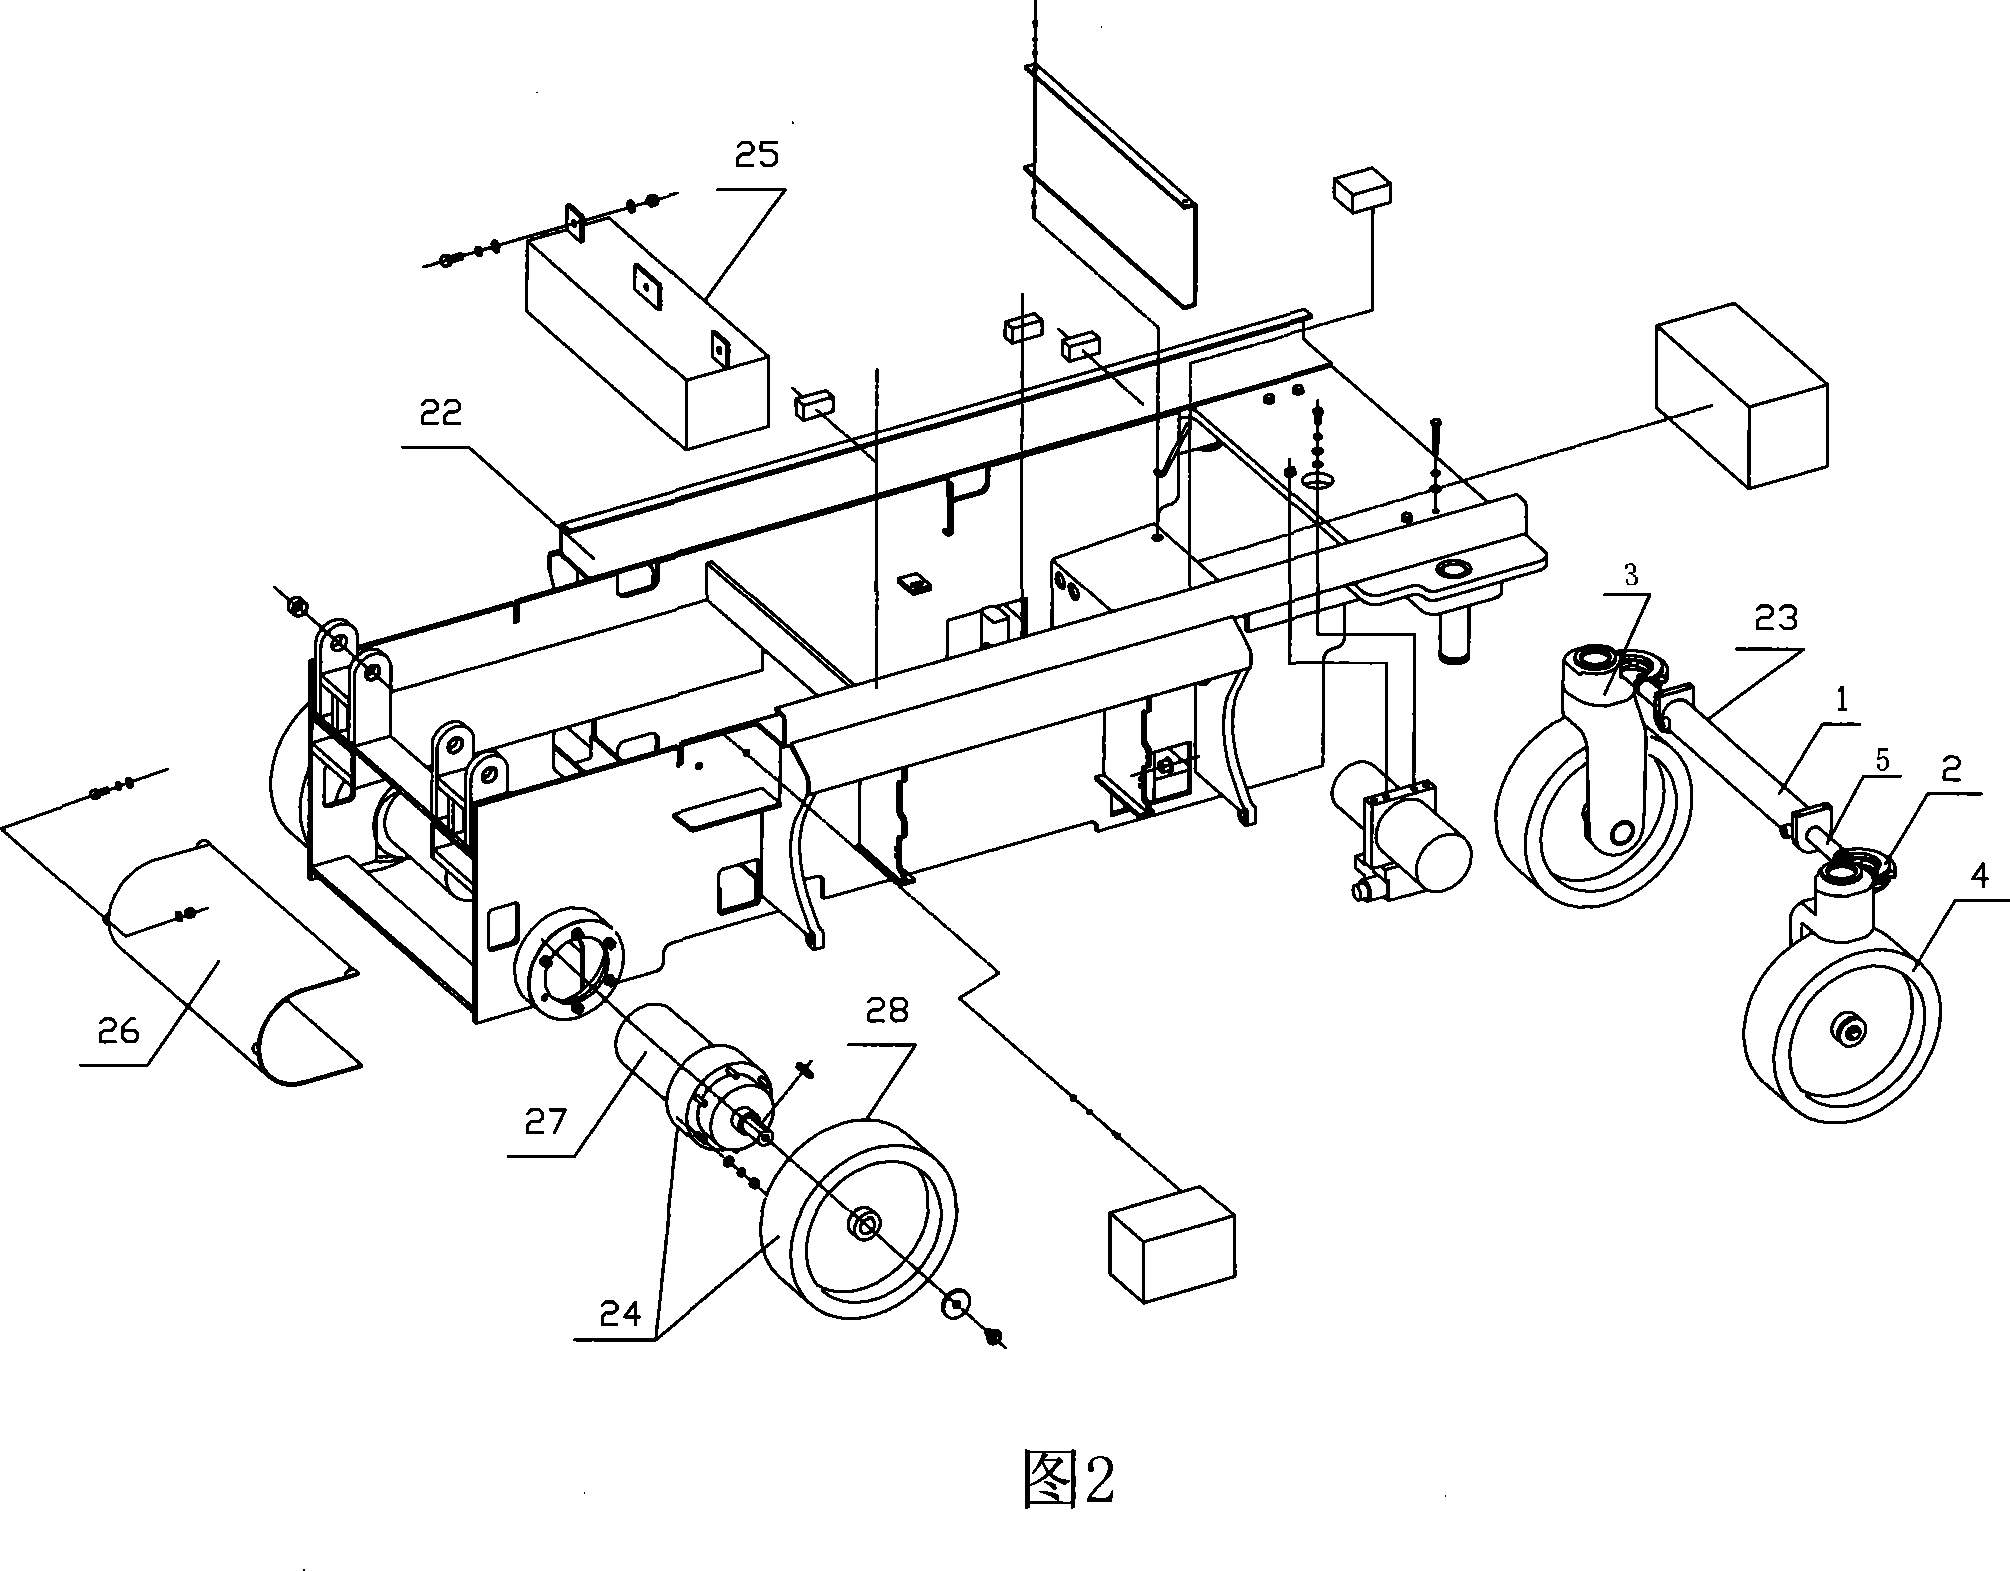 High-altitude operation platform with steering device